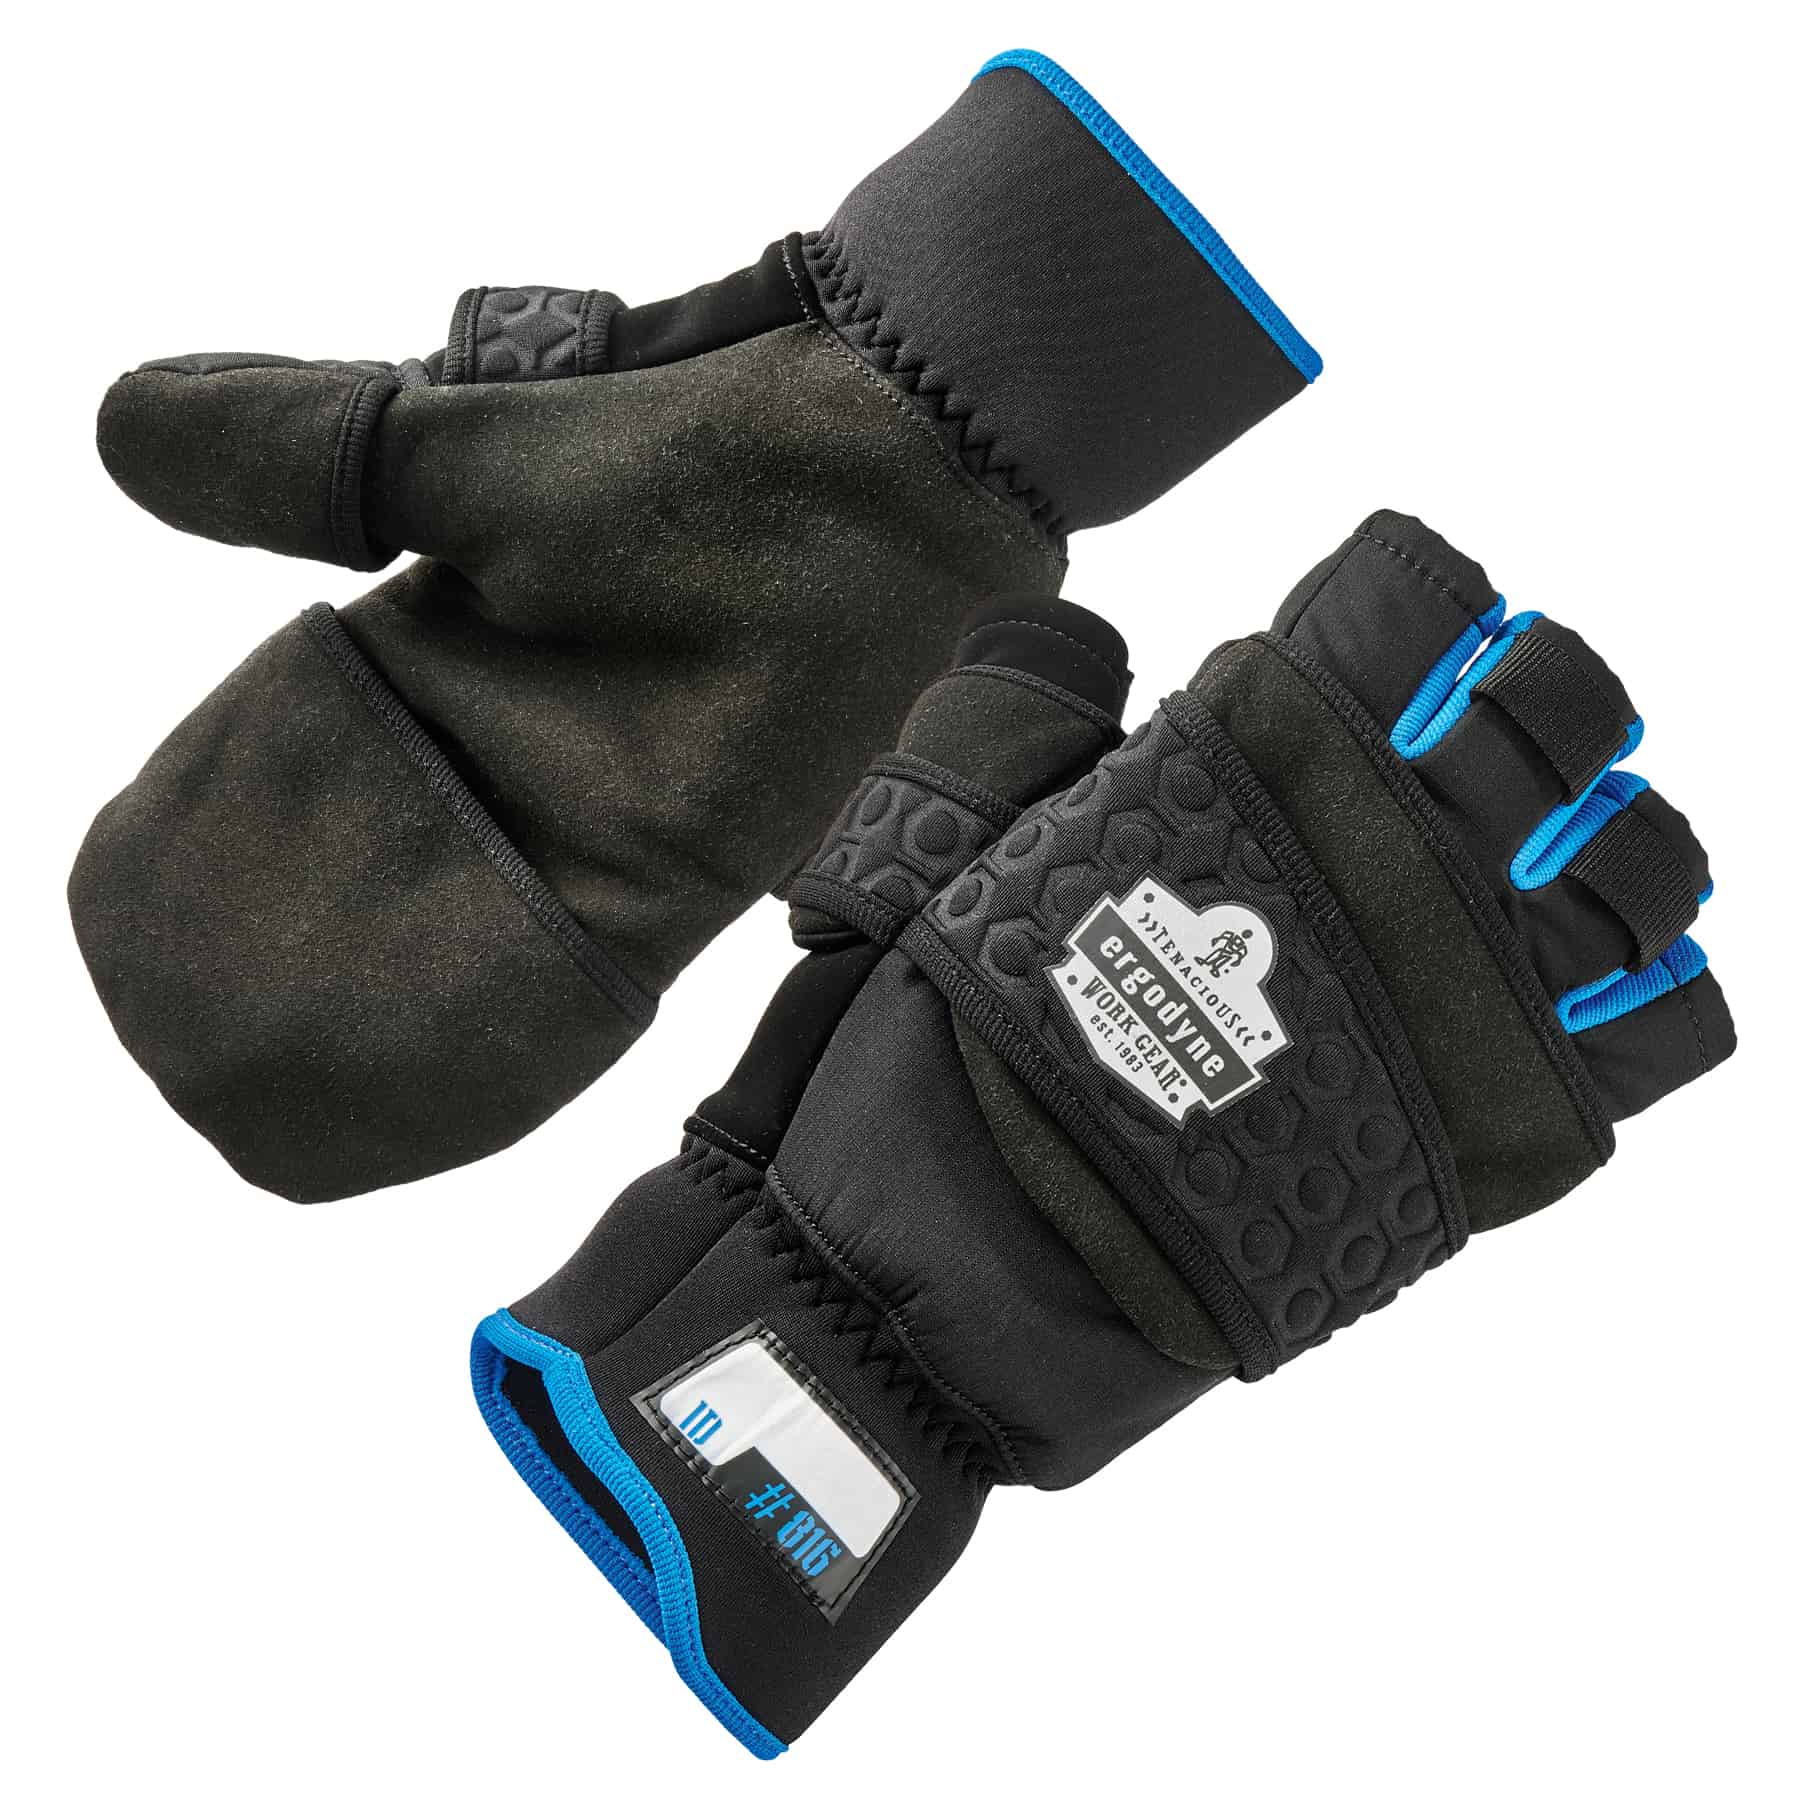 Ladies FLEXITOG Anti-Slip PU Palm-Coated Thermal Insulated Work Mittens FG636 